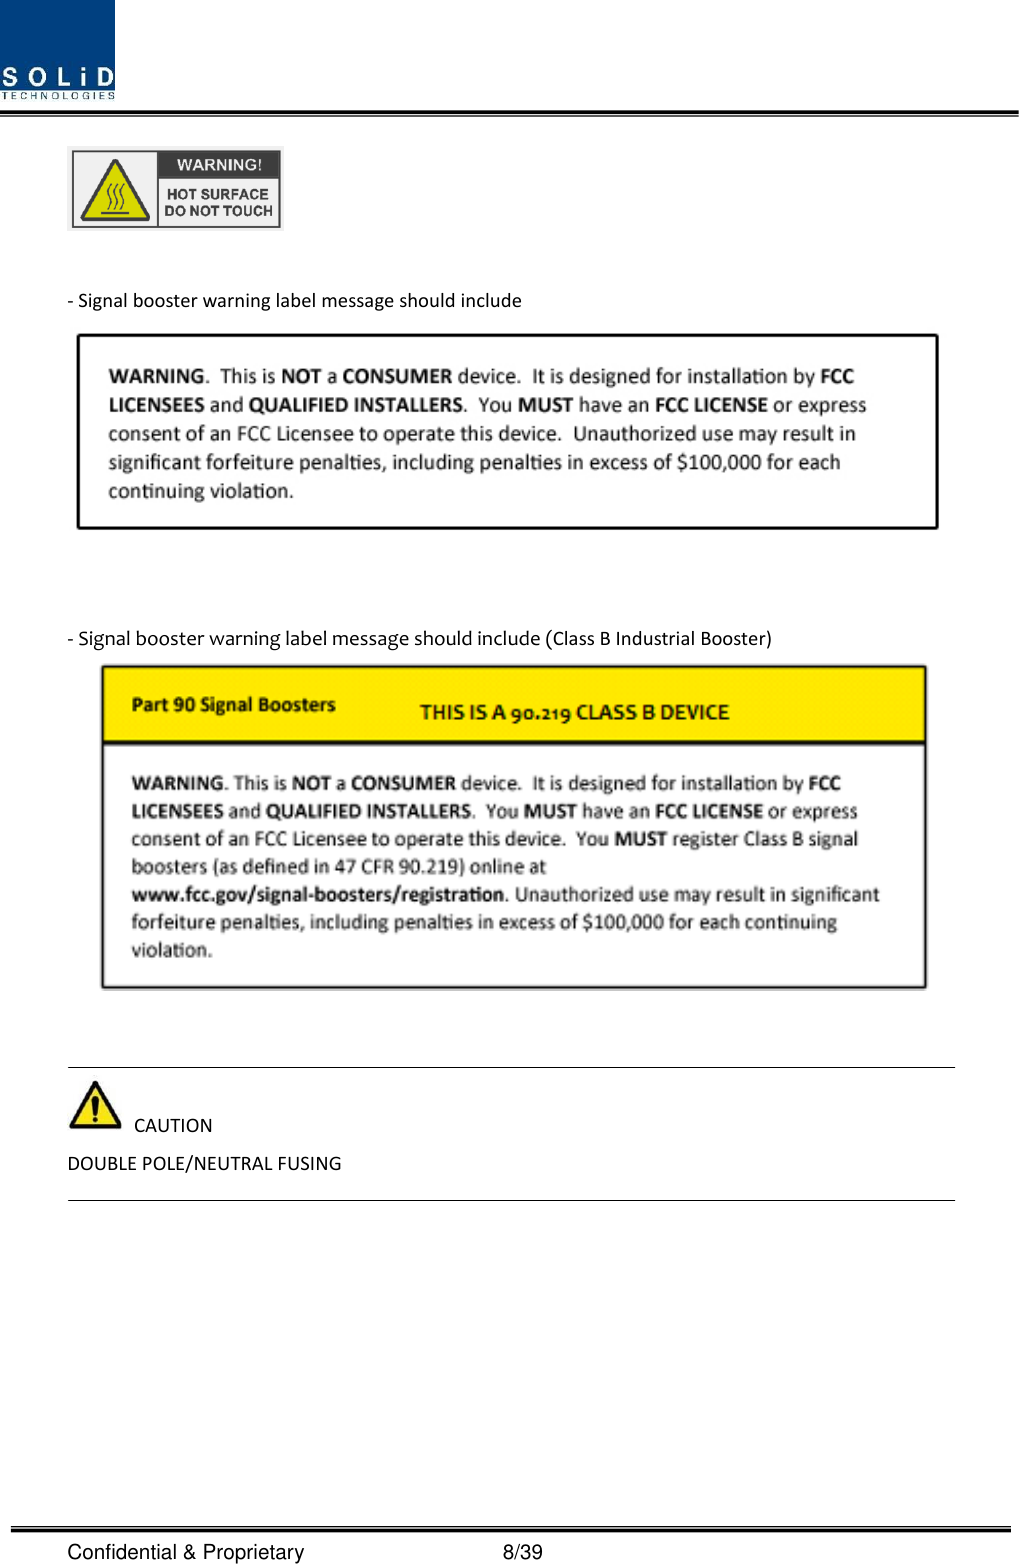  Confidential &amp; Proprietary                                      8/39   - Signal booster warning label message should include    - Signal booster warning label message should include (Class B Industrial Booster)      CAUTION DOUBLE POLE/NEUTRAL FUSING       